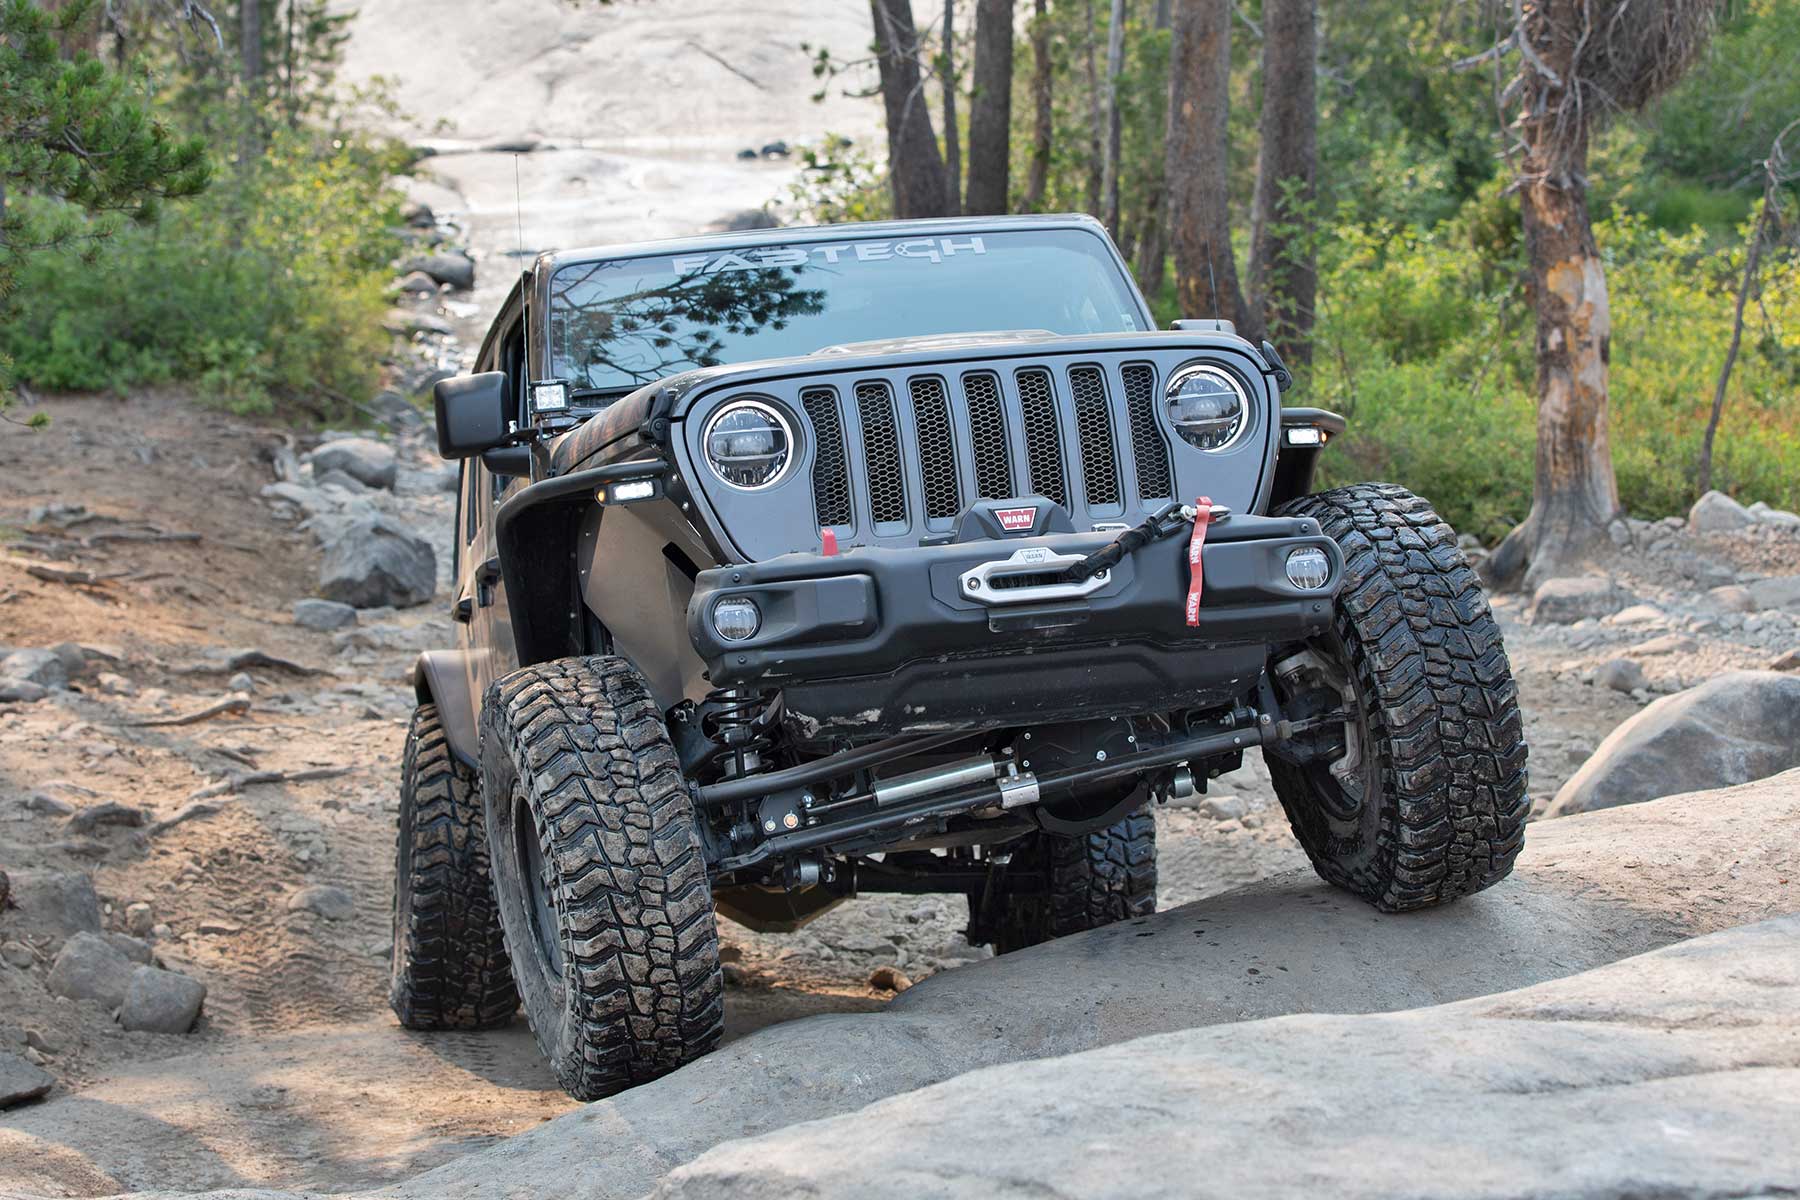 Jeep Gladiator Steering Stabilizer: Enhance Off-Road Control